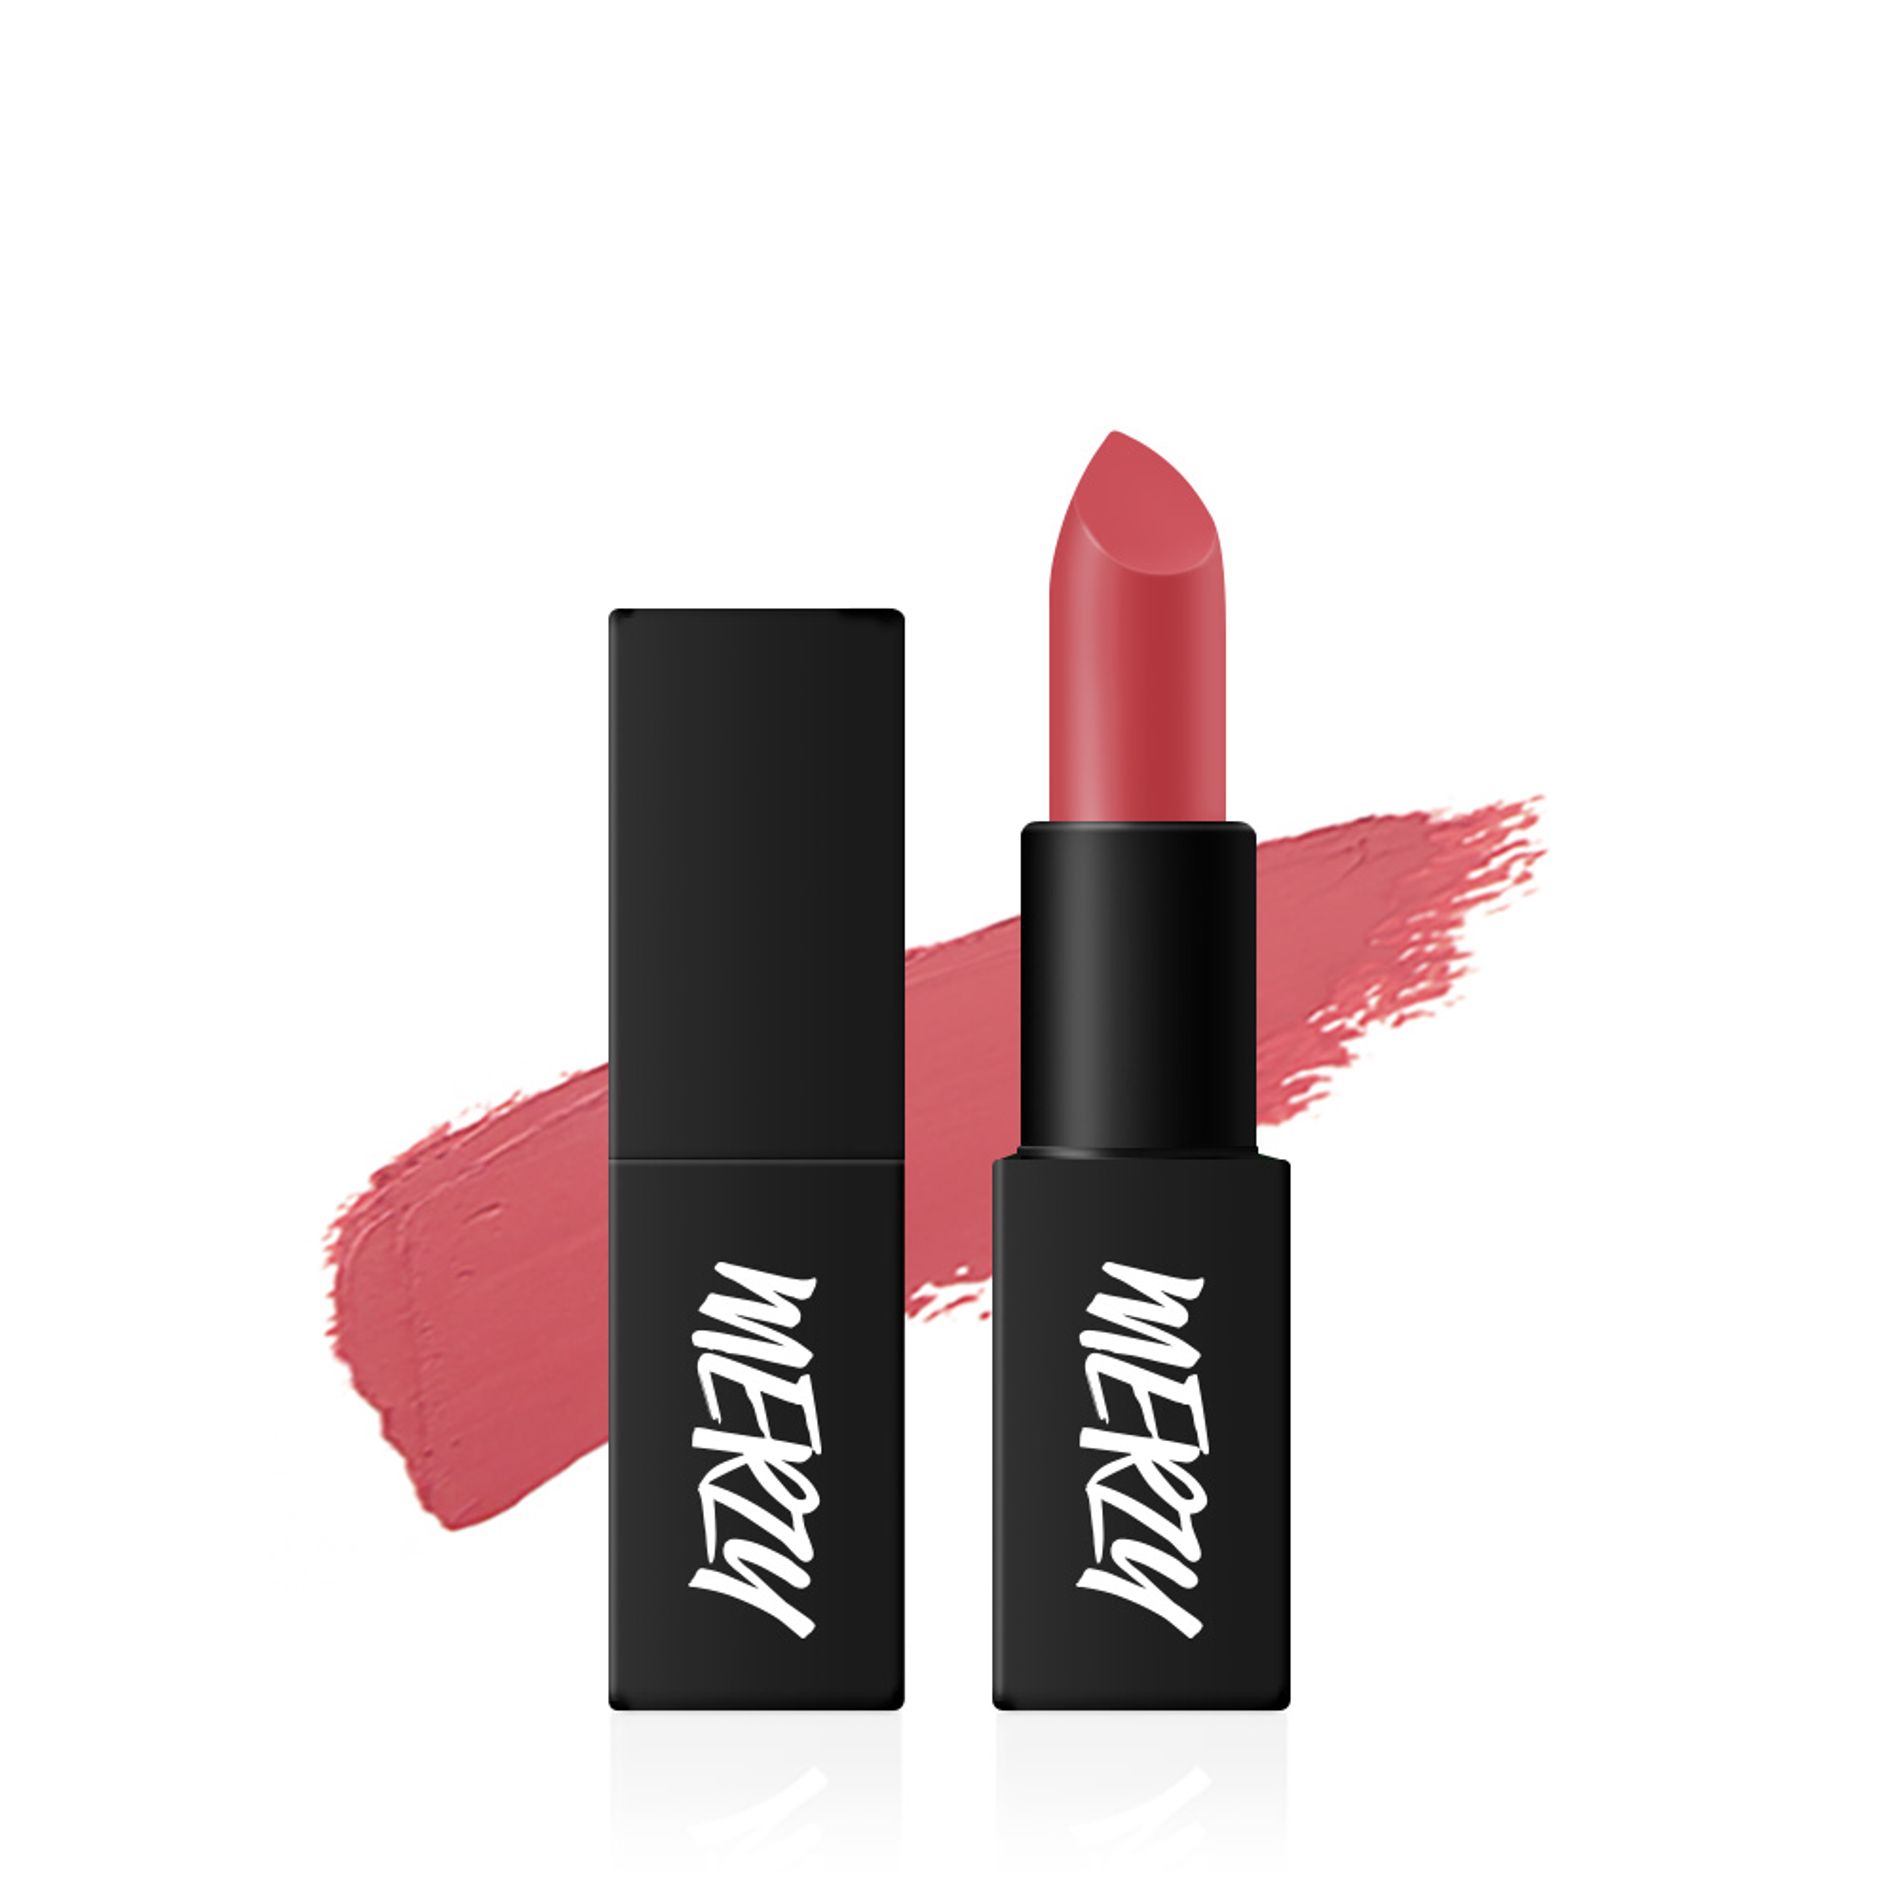 son-thoi-merzy-the-first-lipstick-3-5g-me-series-15